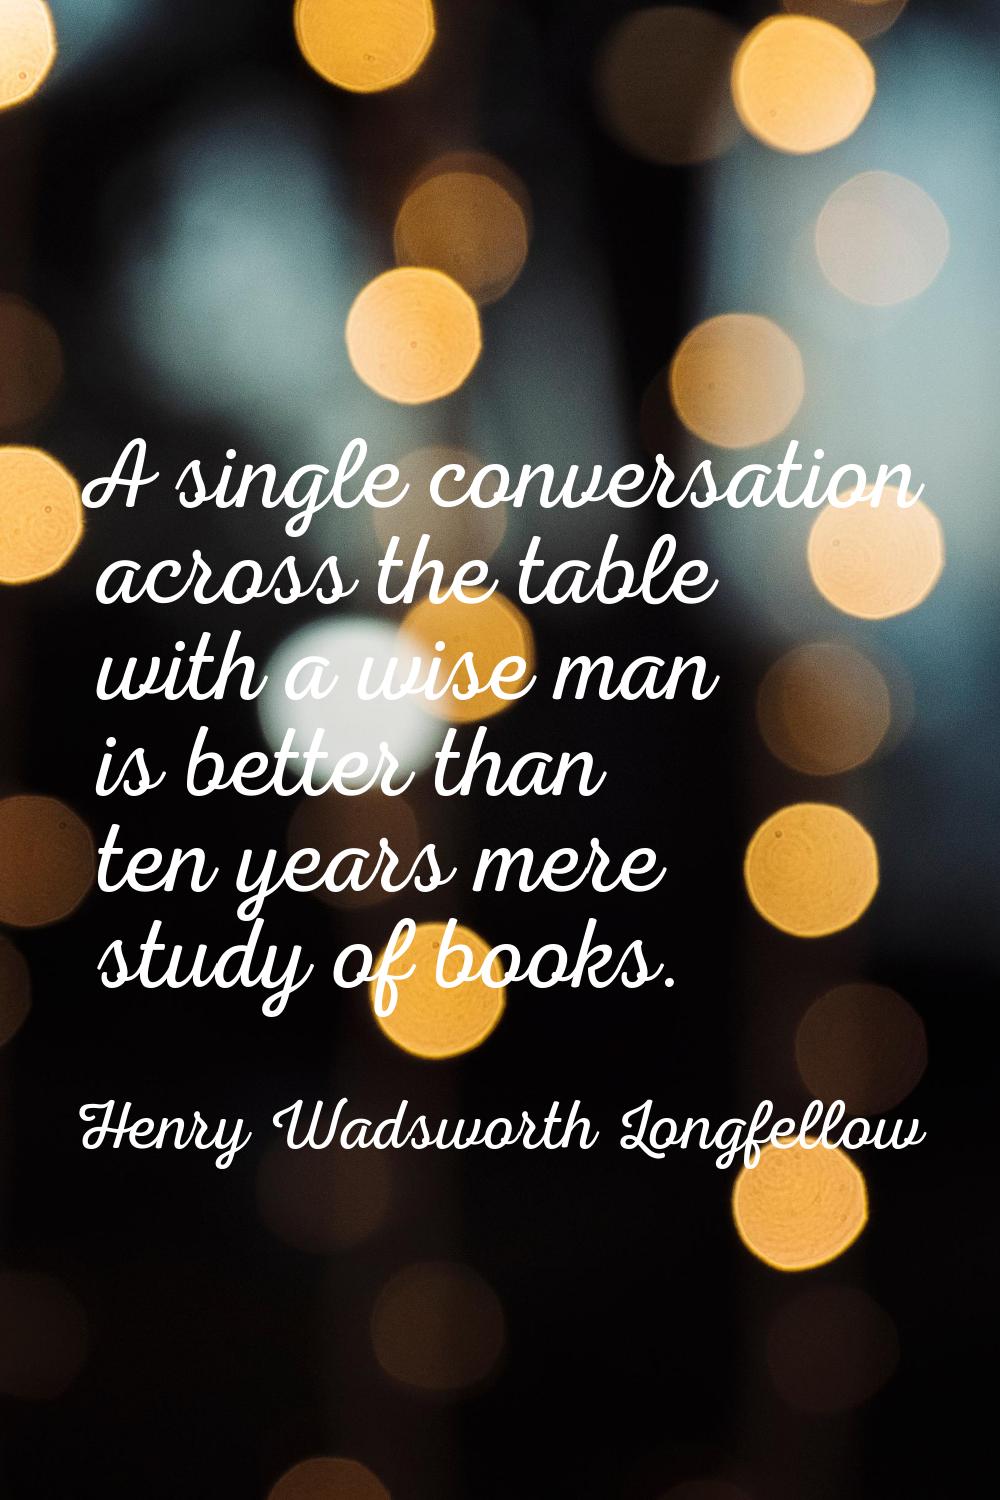 A single conversation across the table with a wise man is better than ten years mere study of books